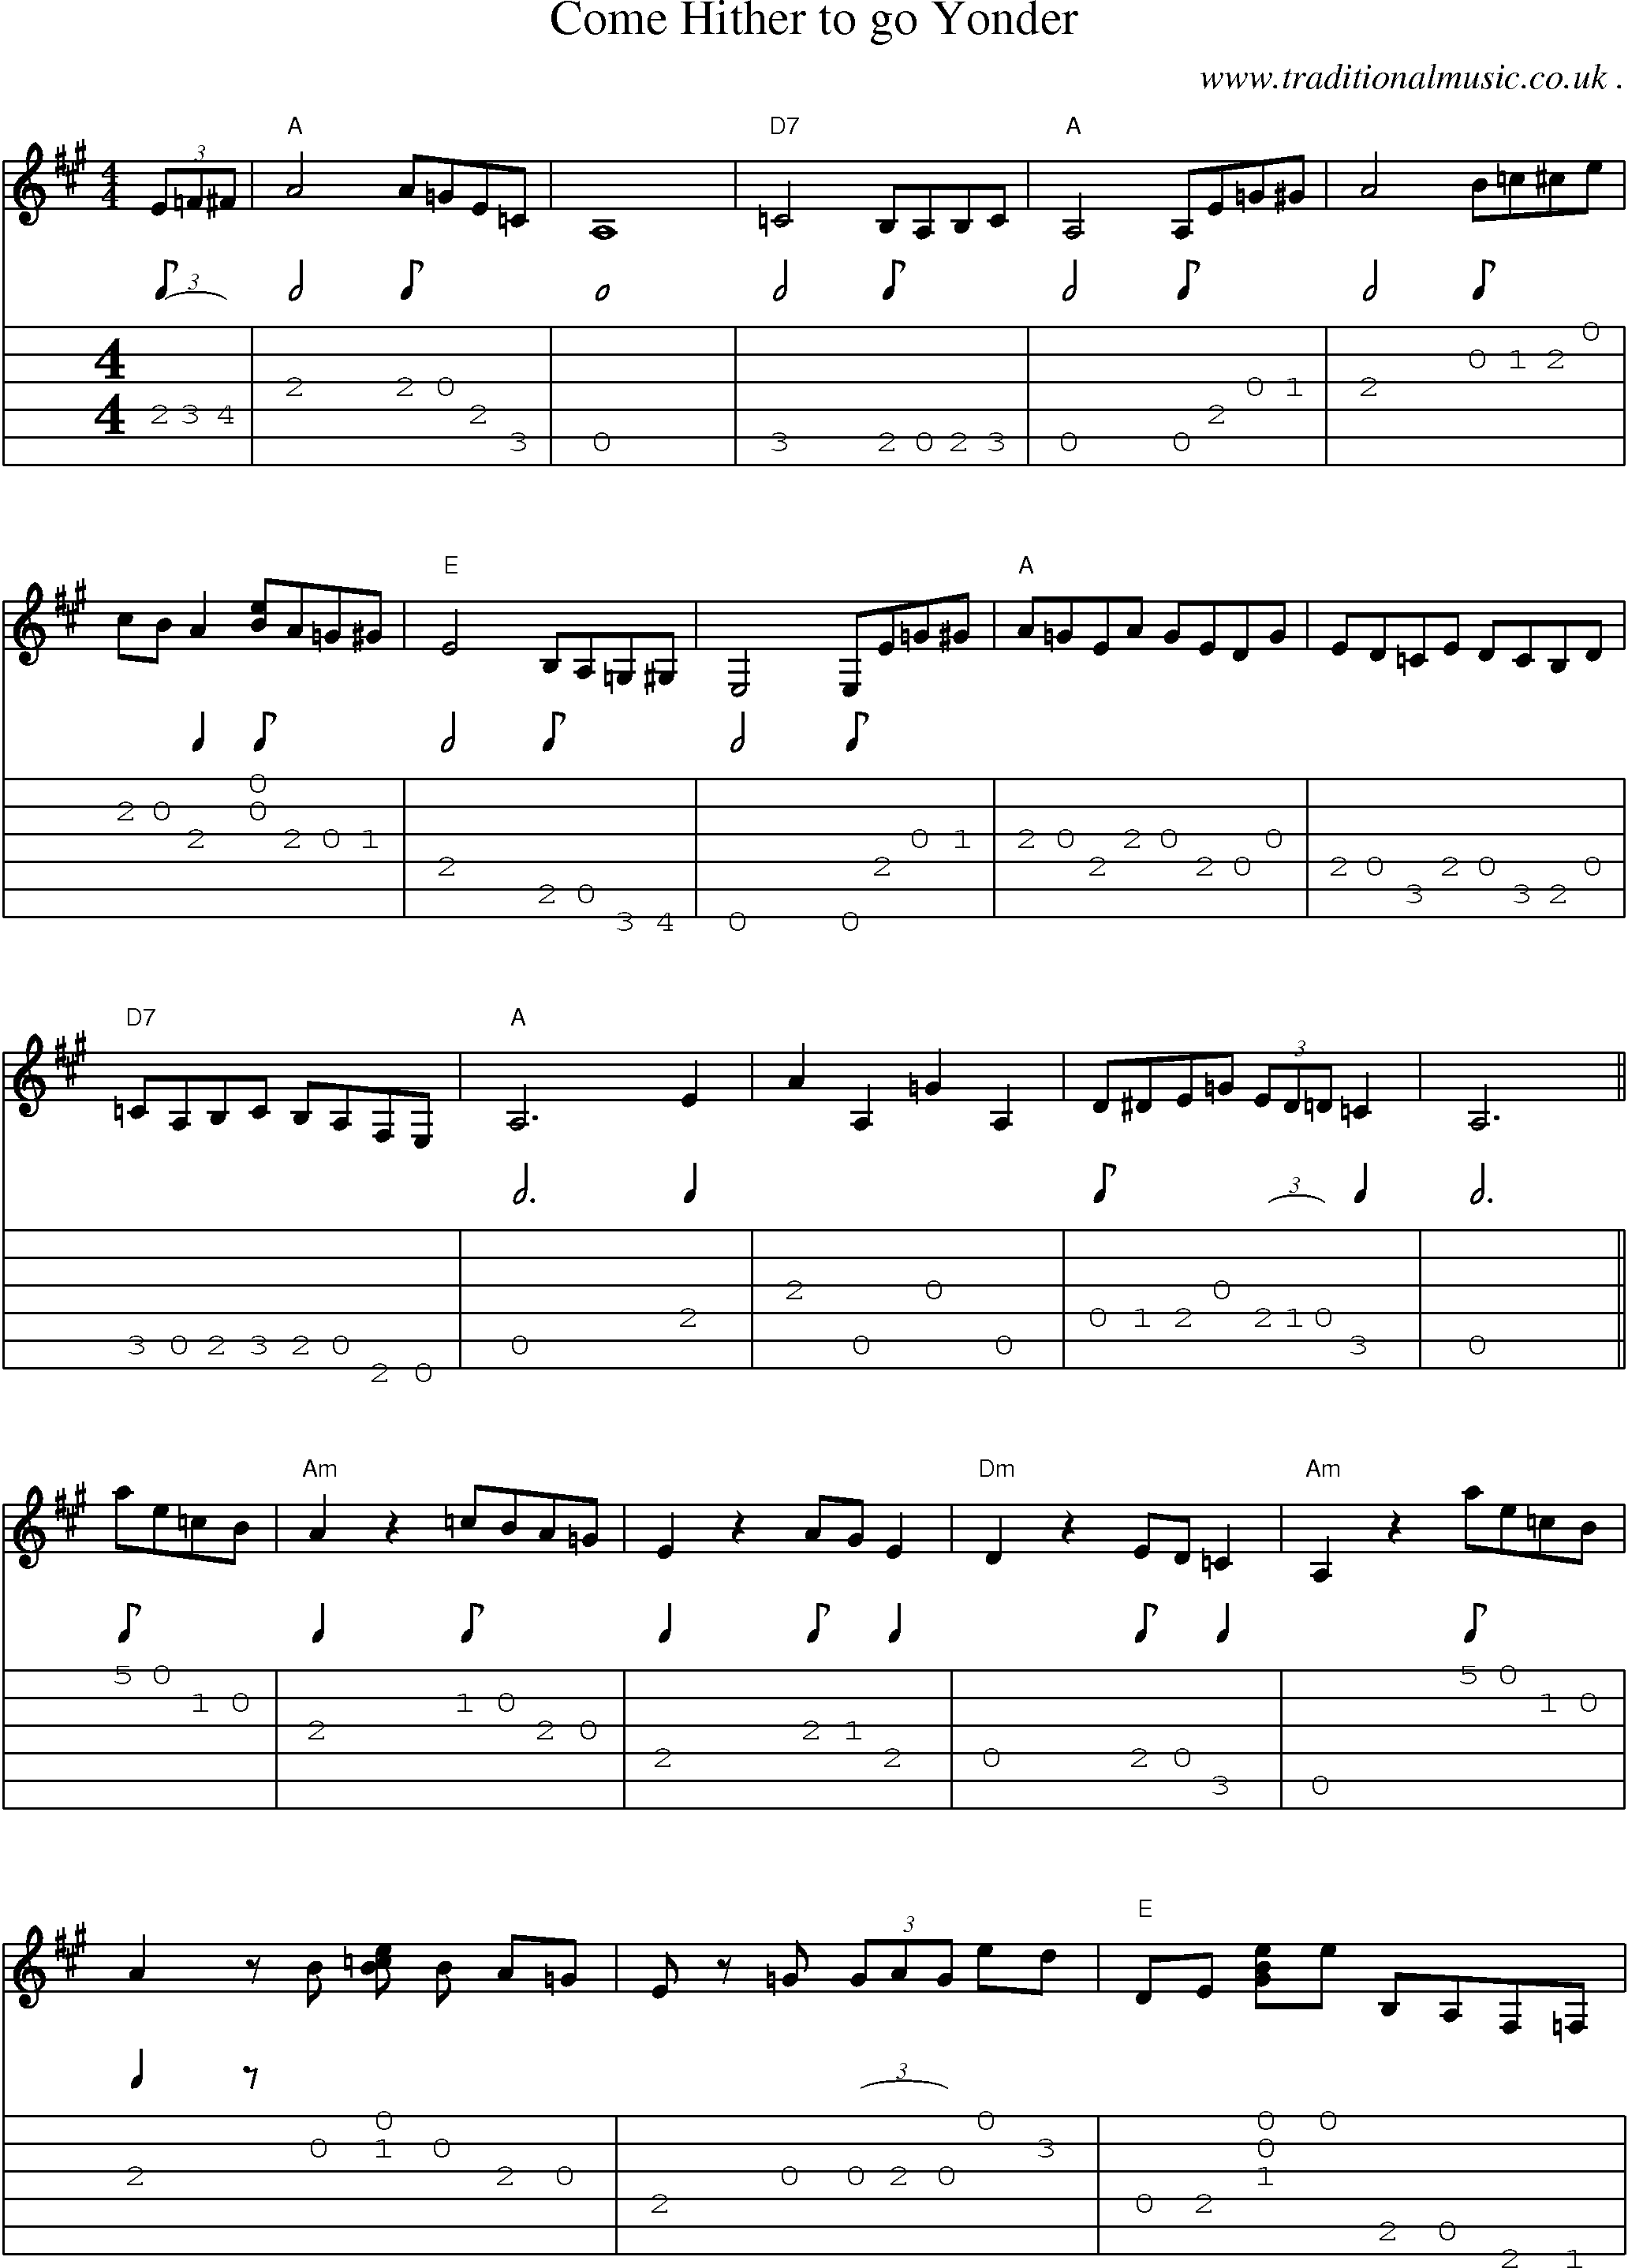 Music Score and Guitar Tabs for Come Hither To Go Yonder